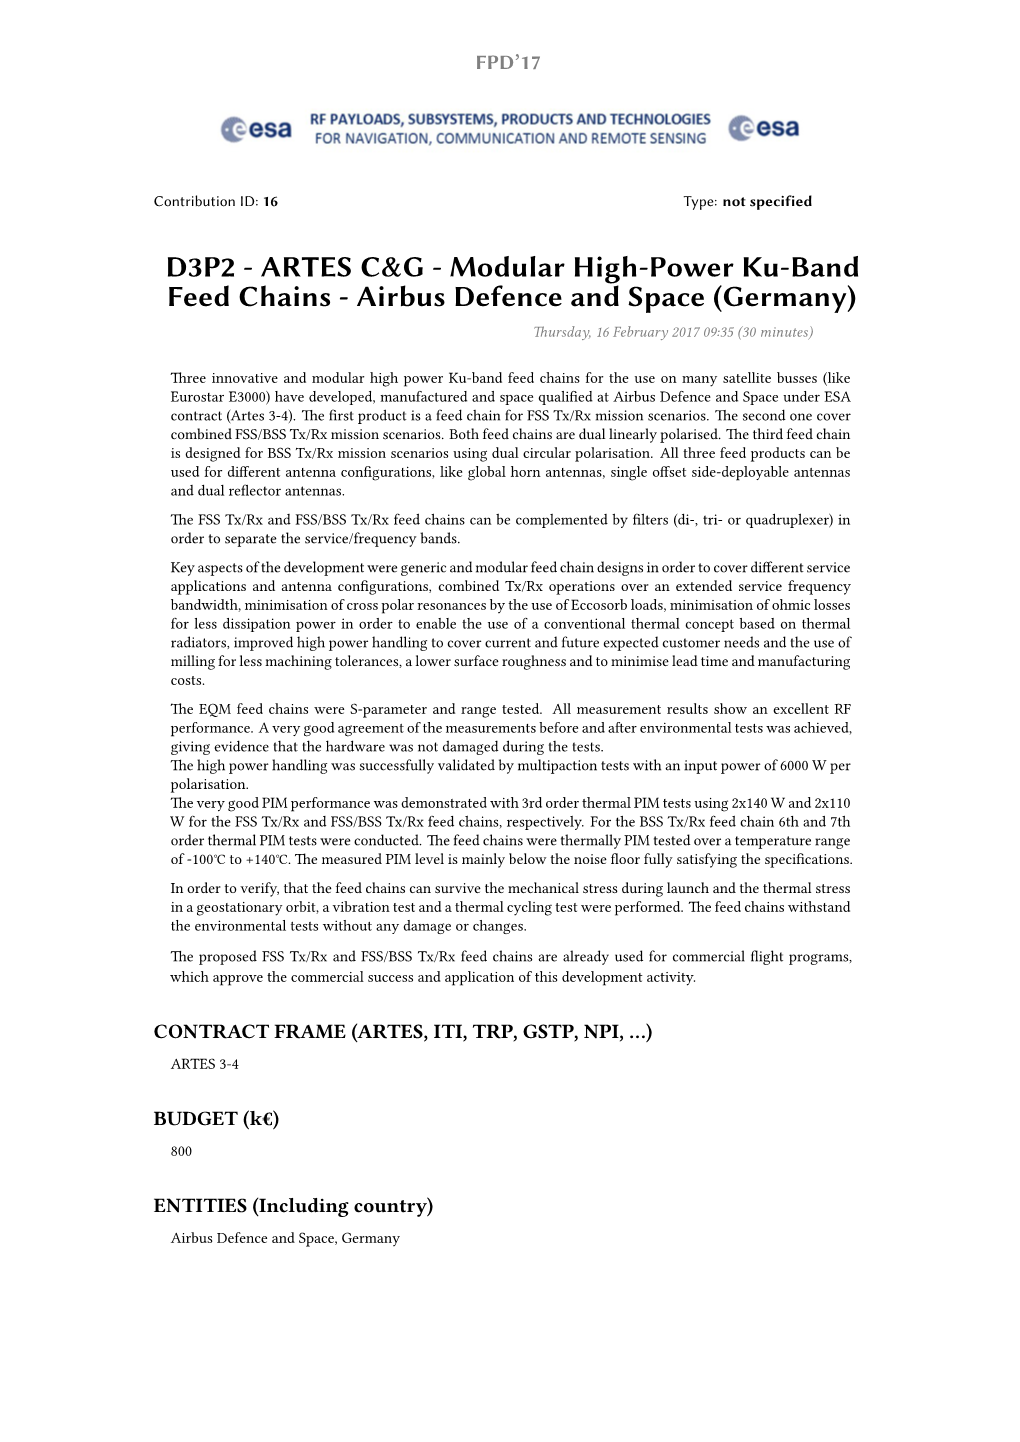 D3P2 - ARTES C&G - Modular High-Power Ku-Band Feed Chains - Airbus Defence and Space (Germany) Thursday, 16 February 2017 09:35 (30 Minutes)